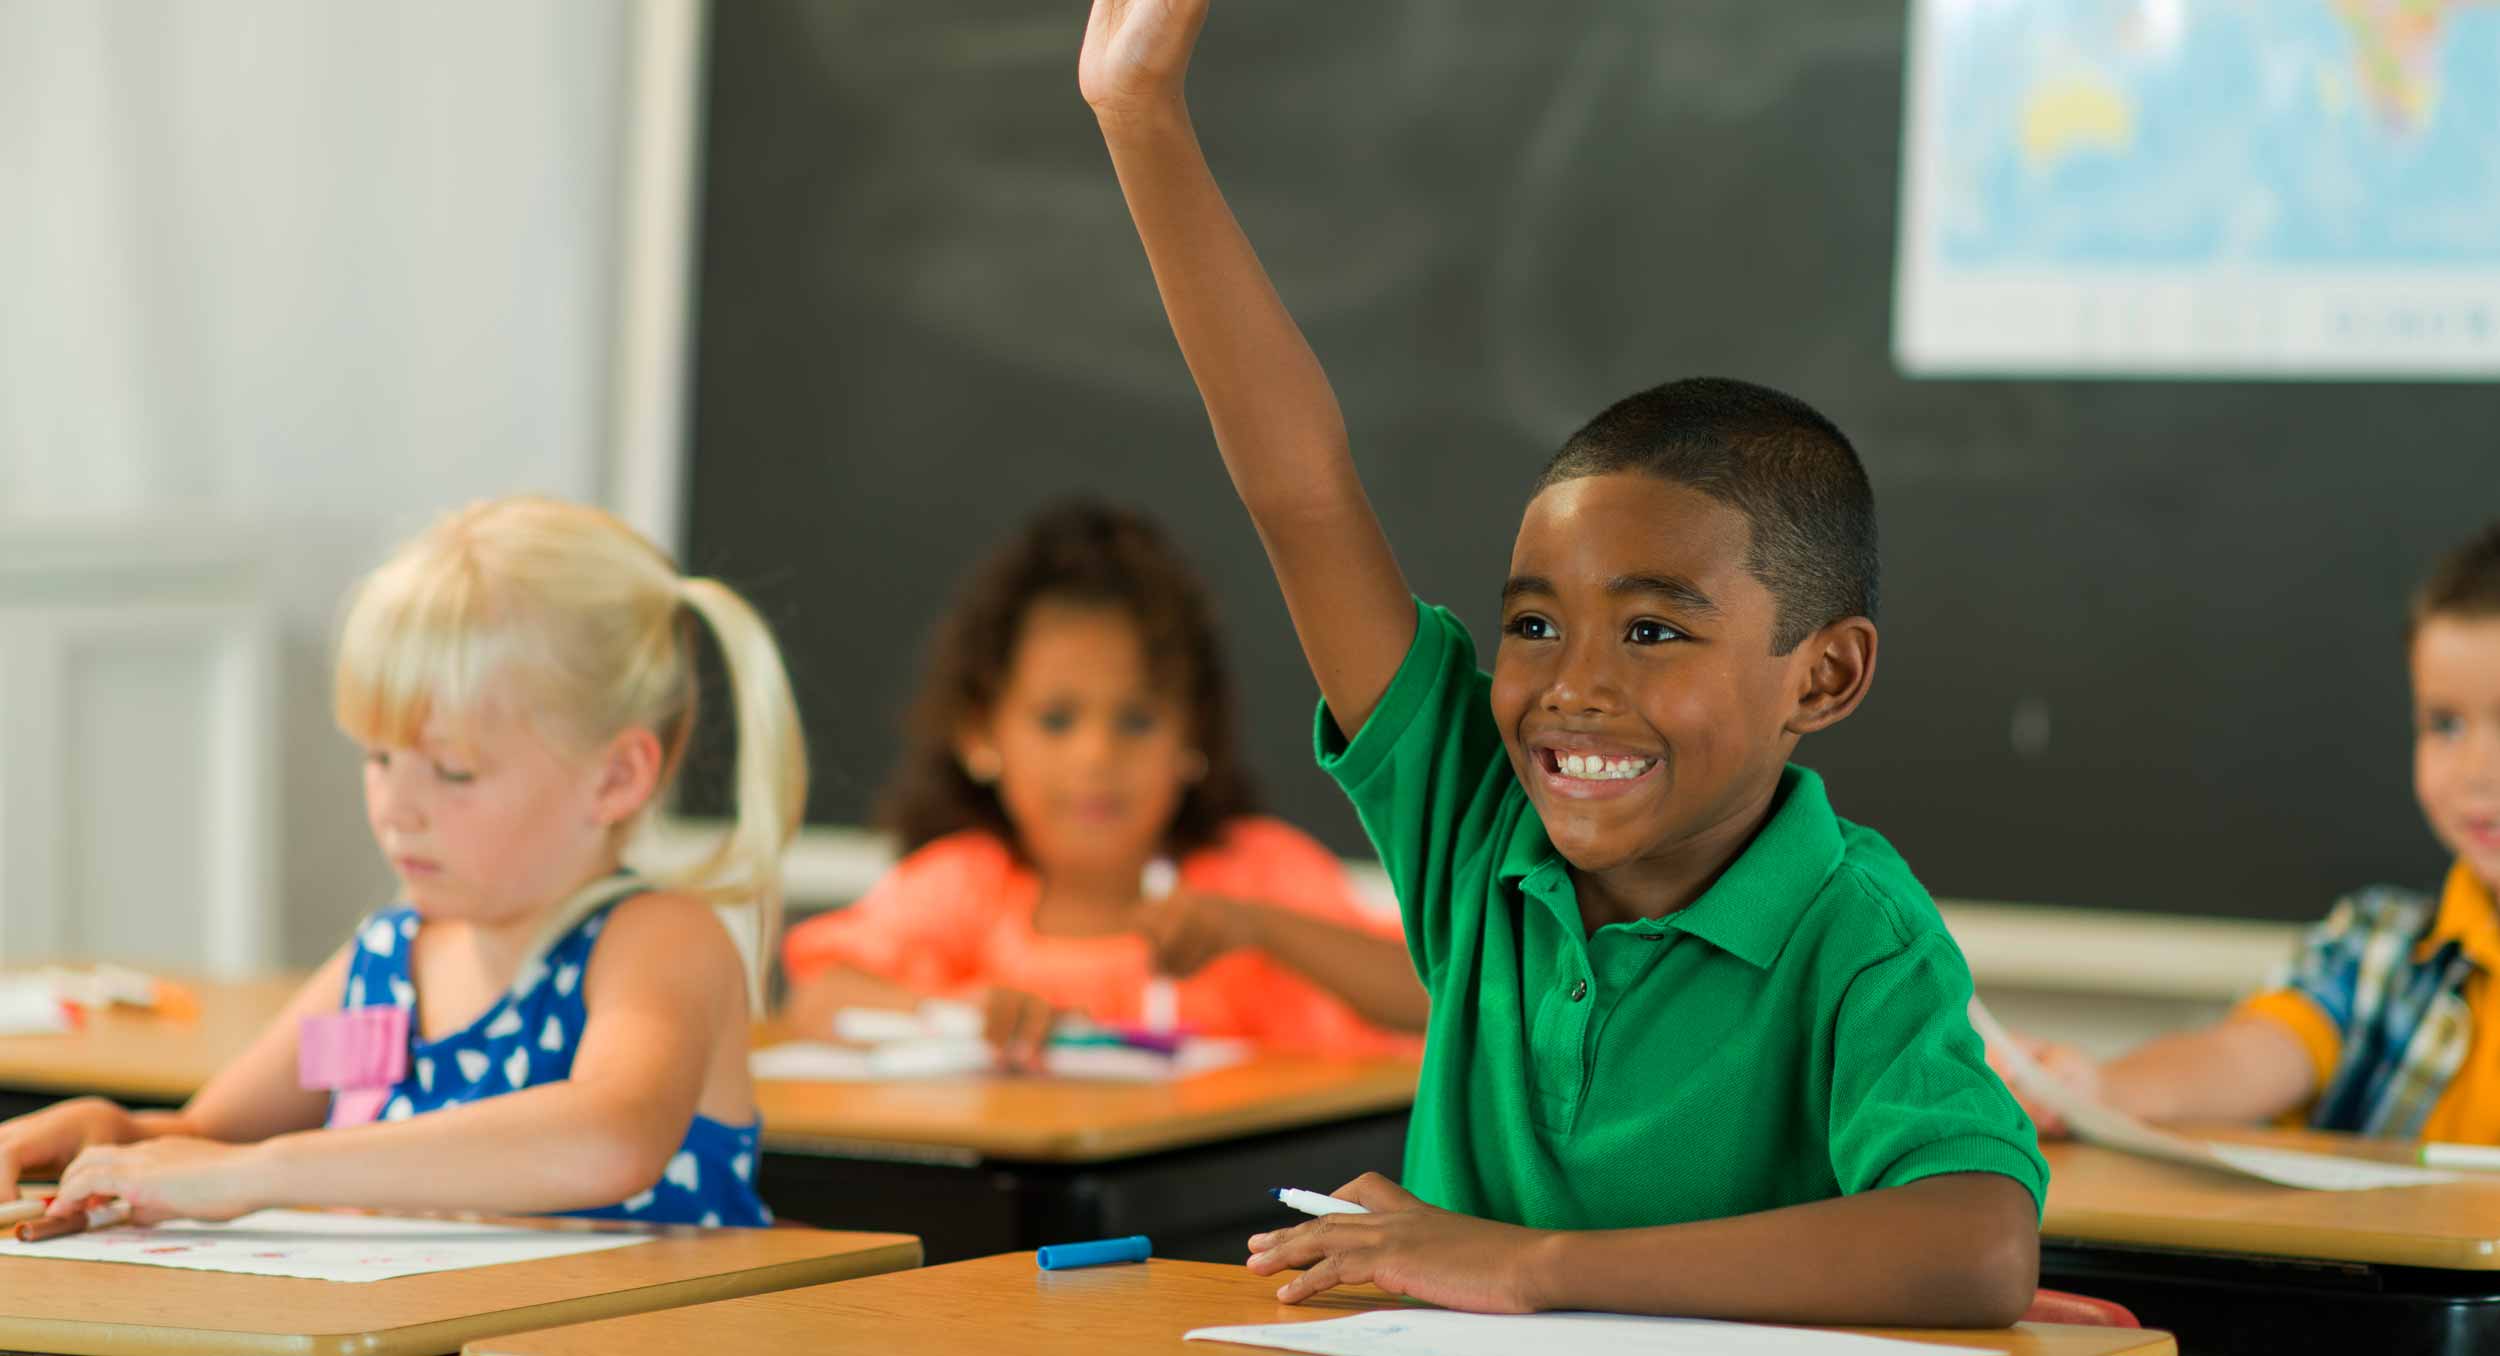 A smiling boy in a green polo raises his hand in an elementary school classroom